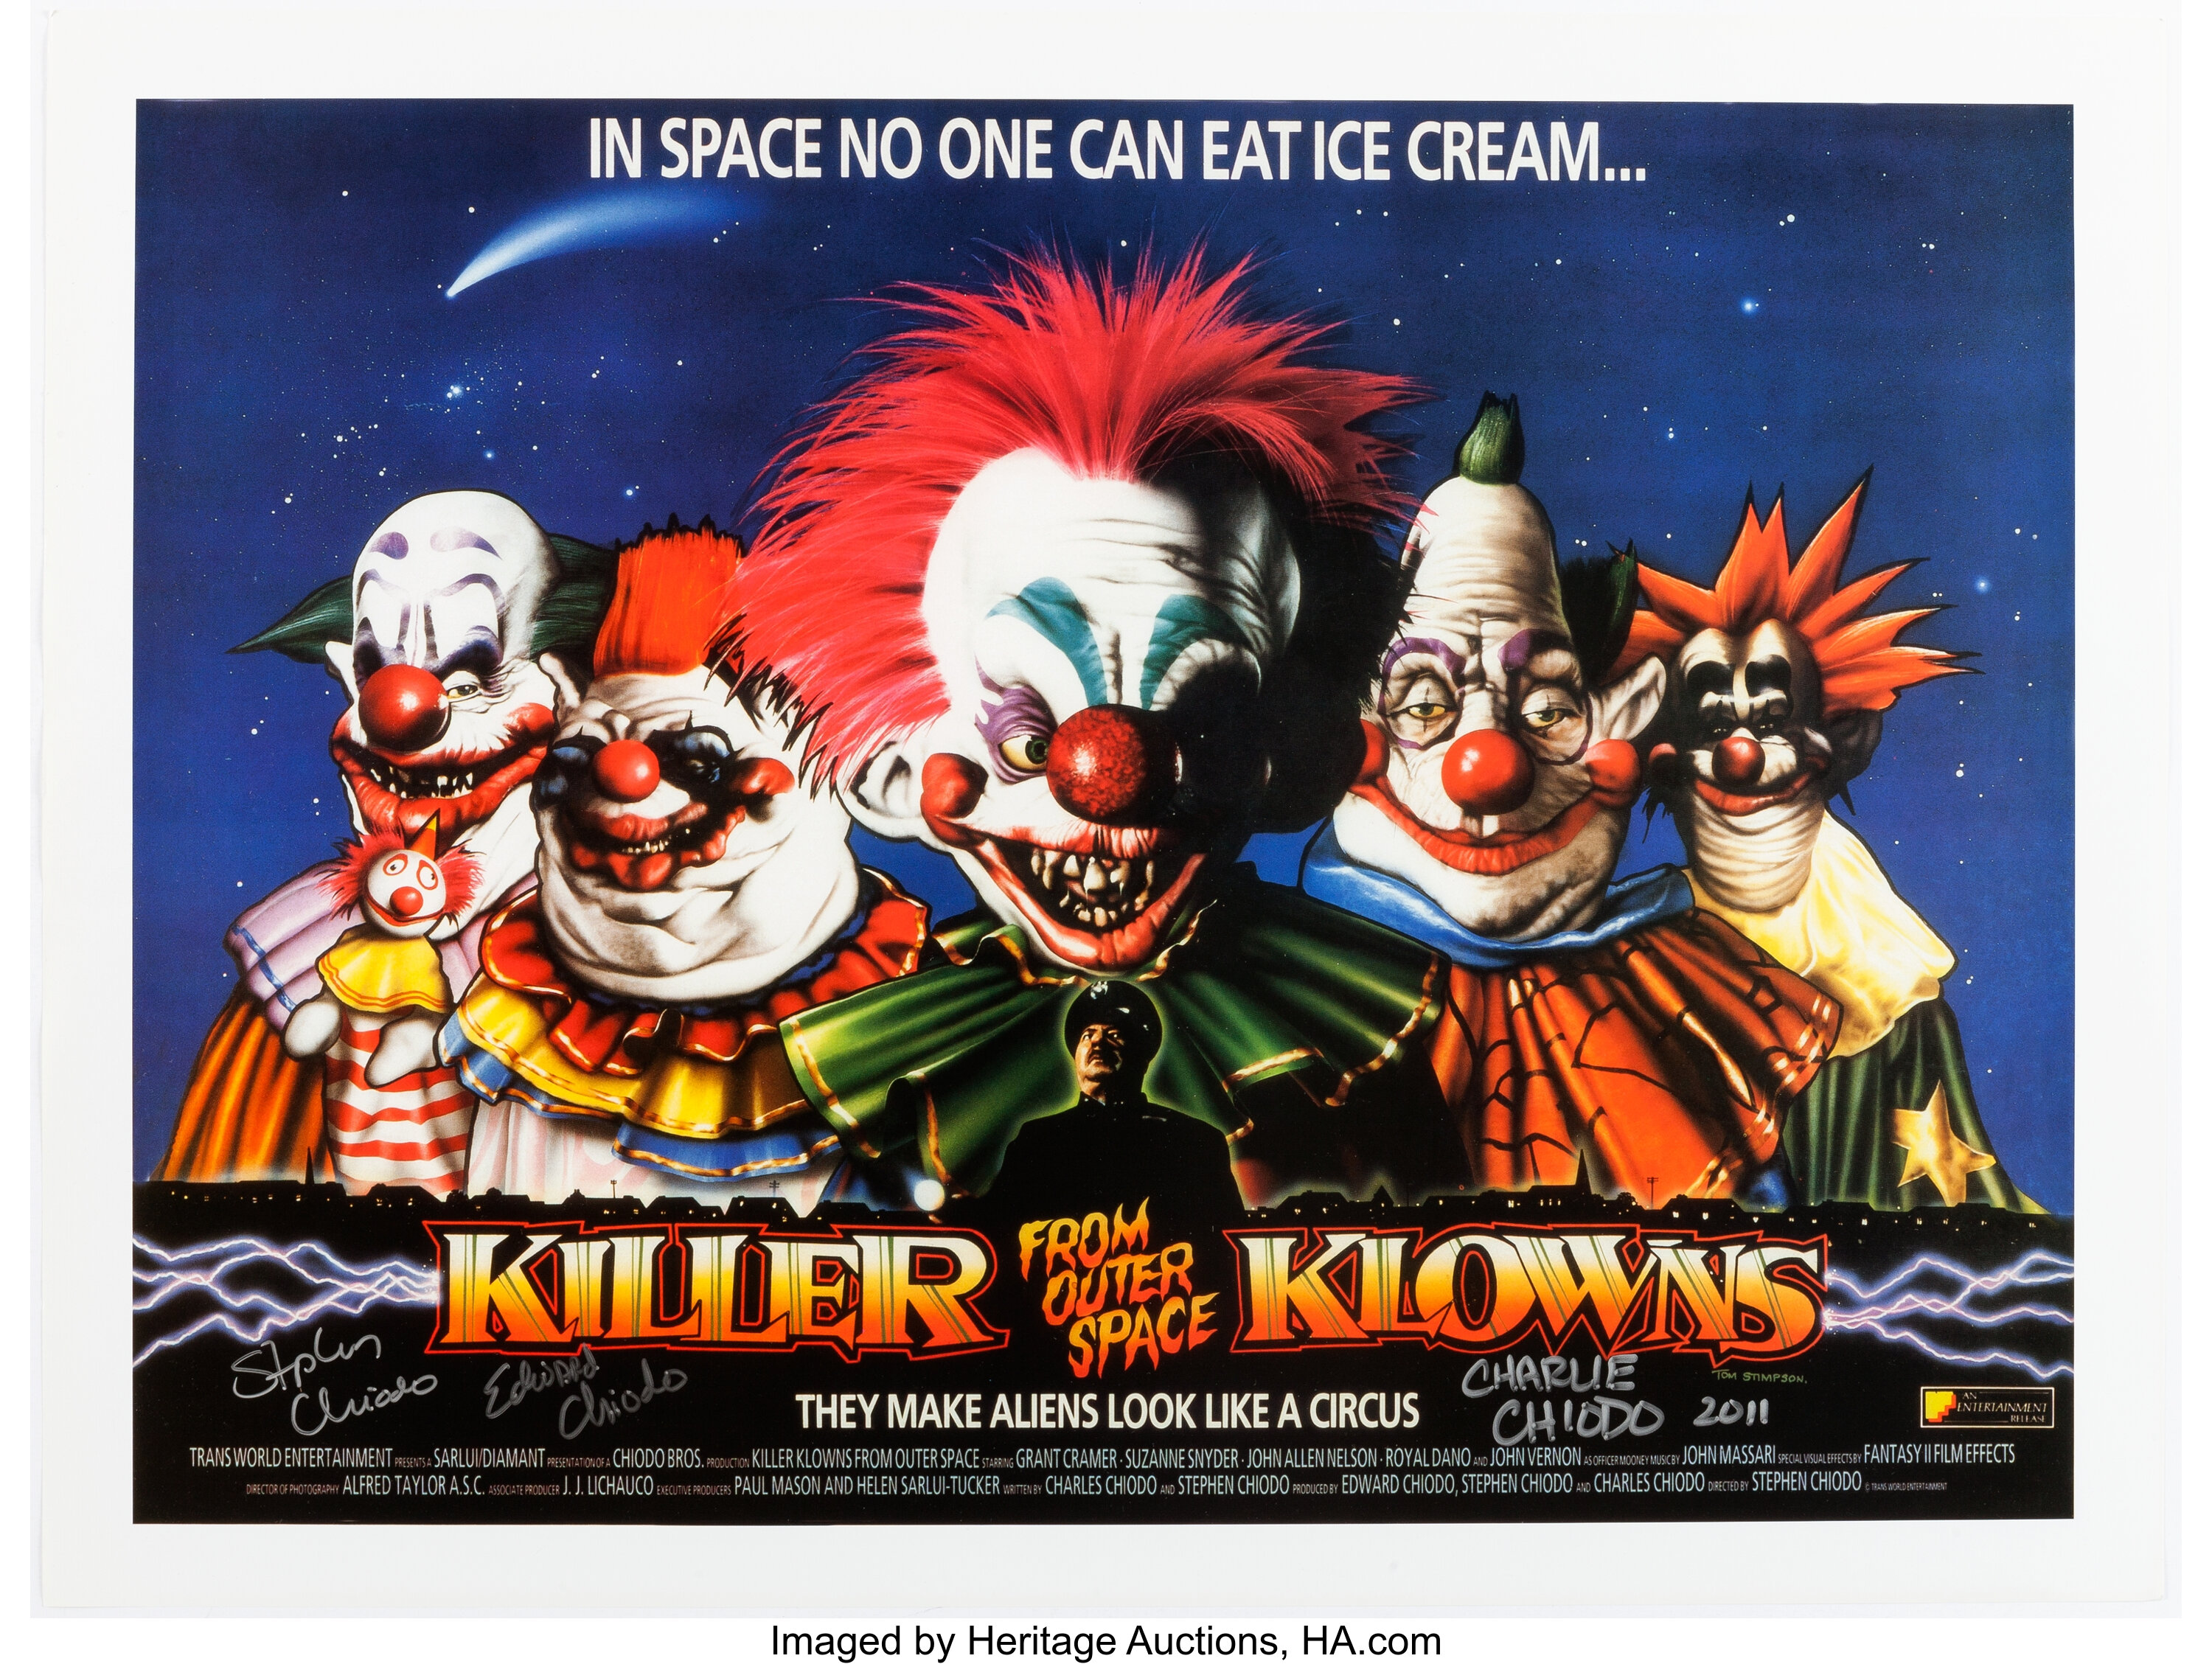 Killer klowns from outer. Клоуны-убийцы из космоса 1988. Killer Klowns from Outer Space 1988.